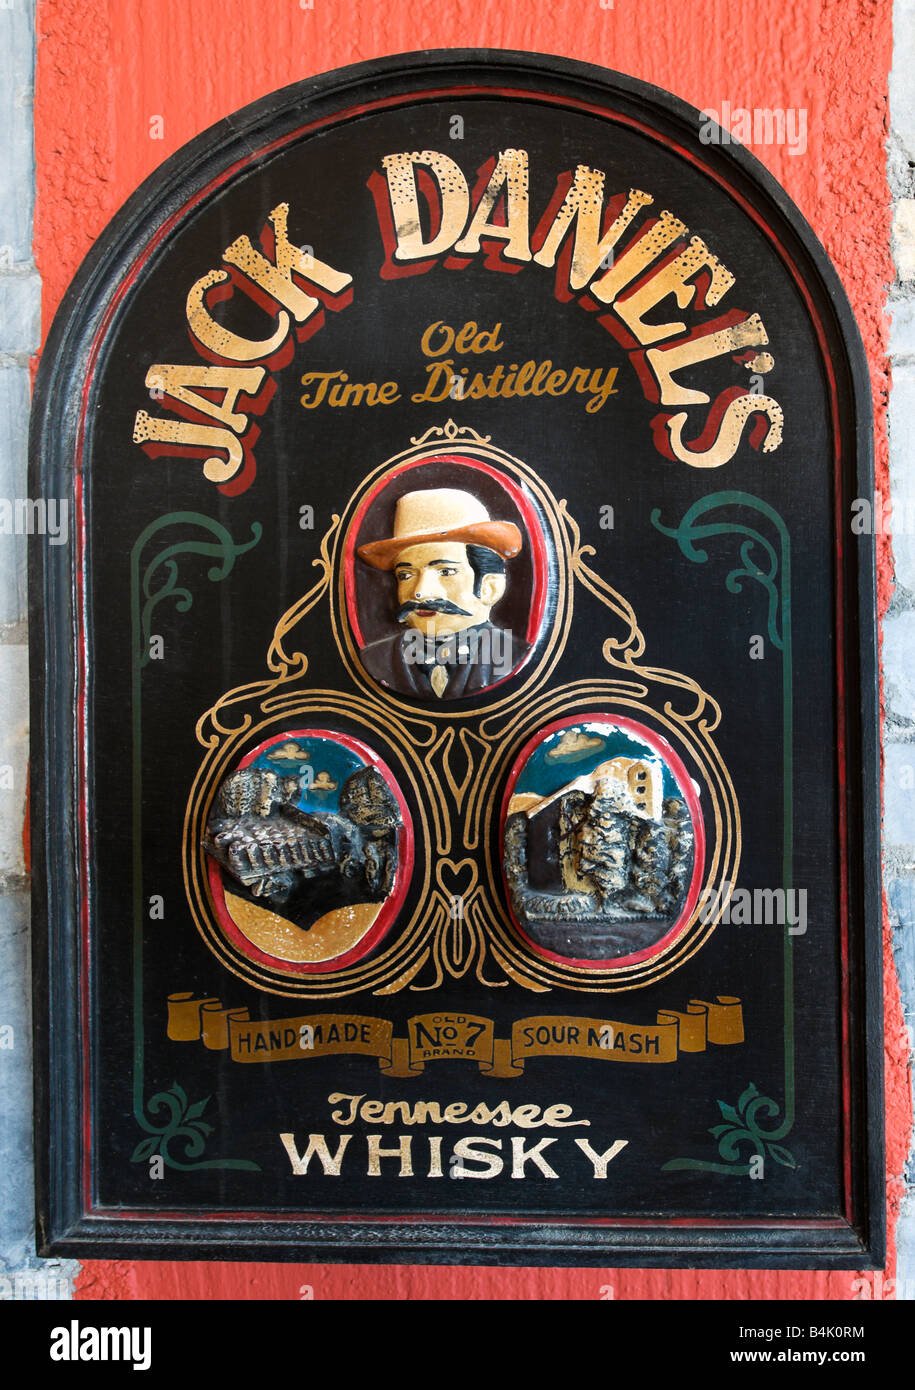 Old advertisement for Jack Daniels Bourbon Whisky on the wall of a hotel bar Stock Photo